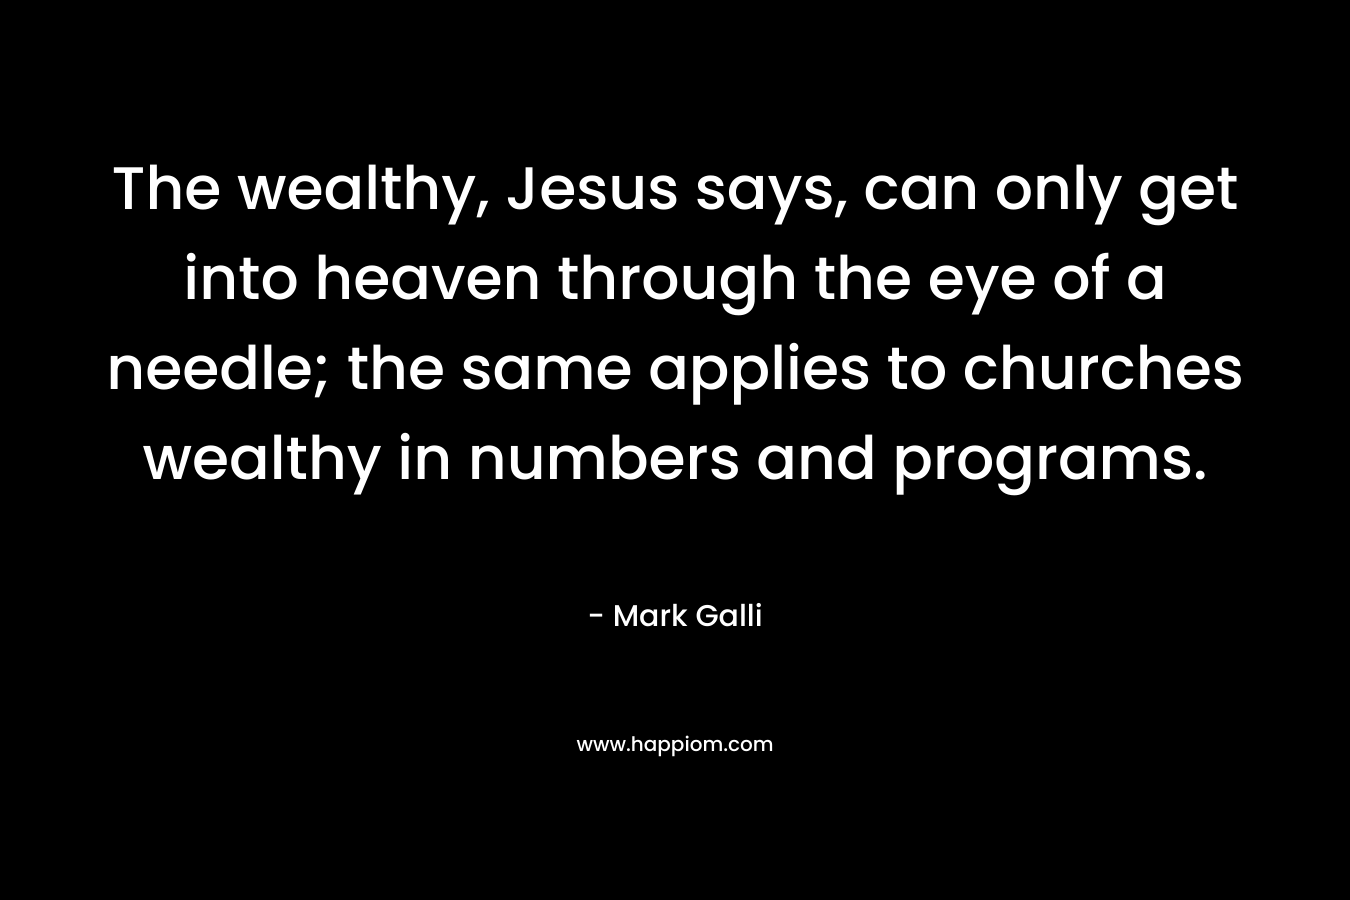 The wealthy, Jesus says, can only get into heaven through the eye of a needle; the same applies to churches wealthy in numbers and programs. – Mark Galli